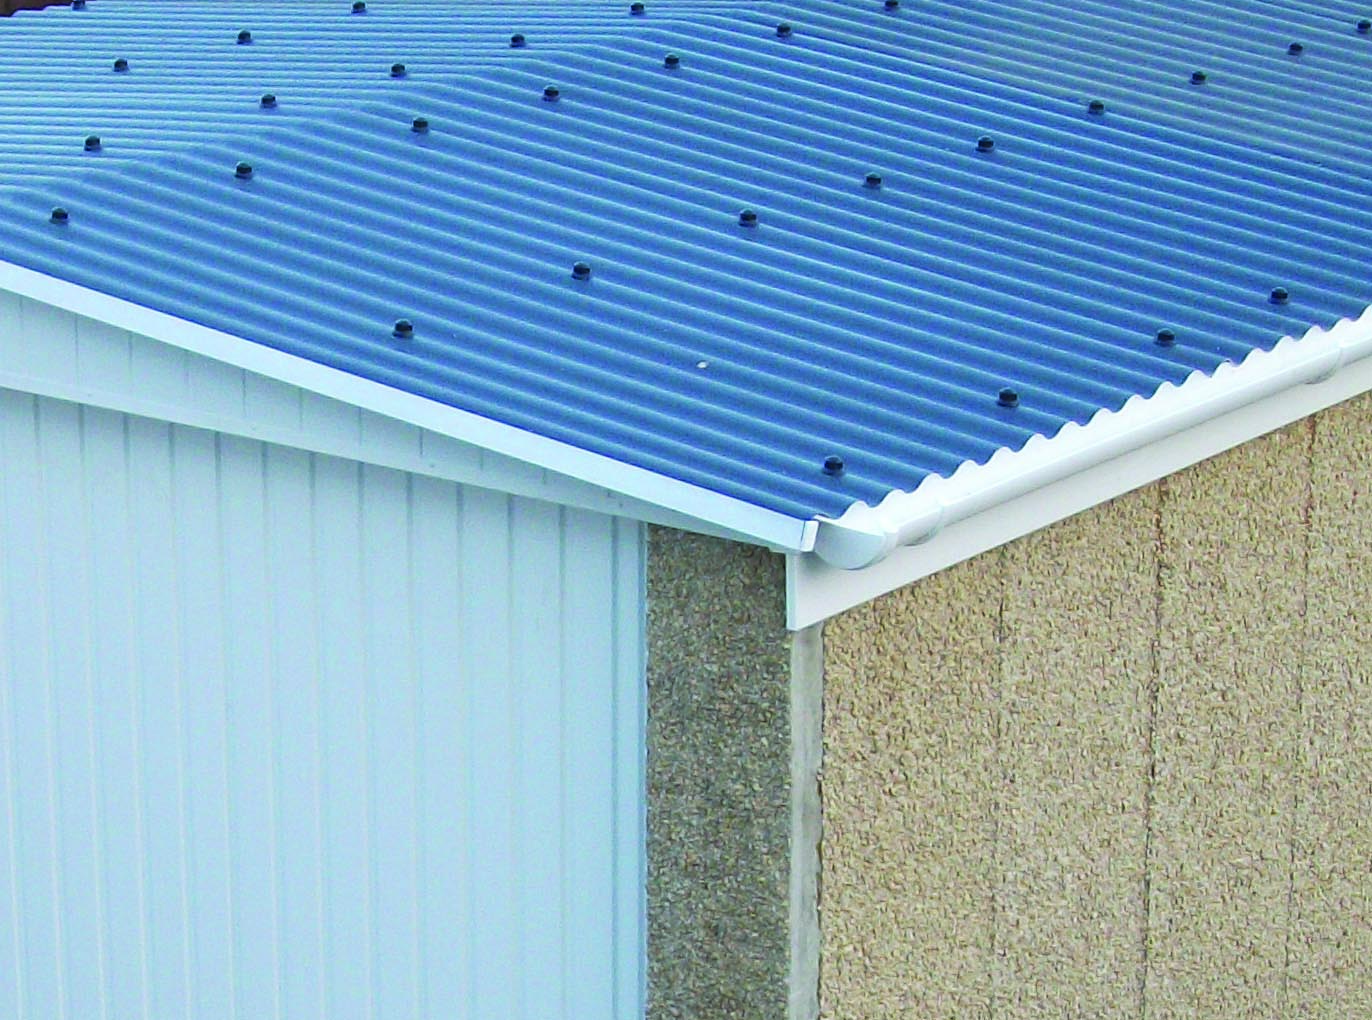 PVC rainwater goods fitted to your garage